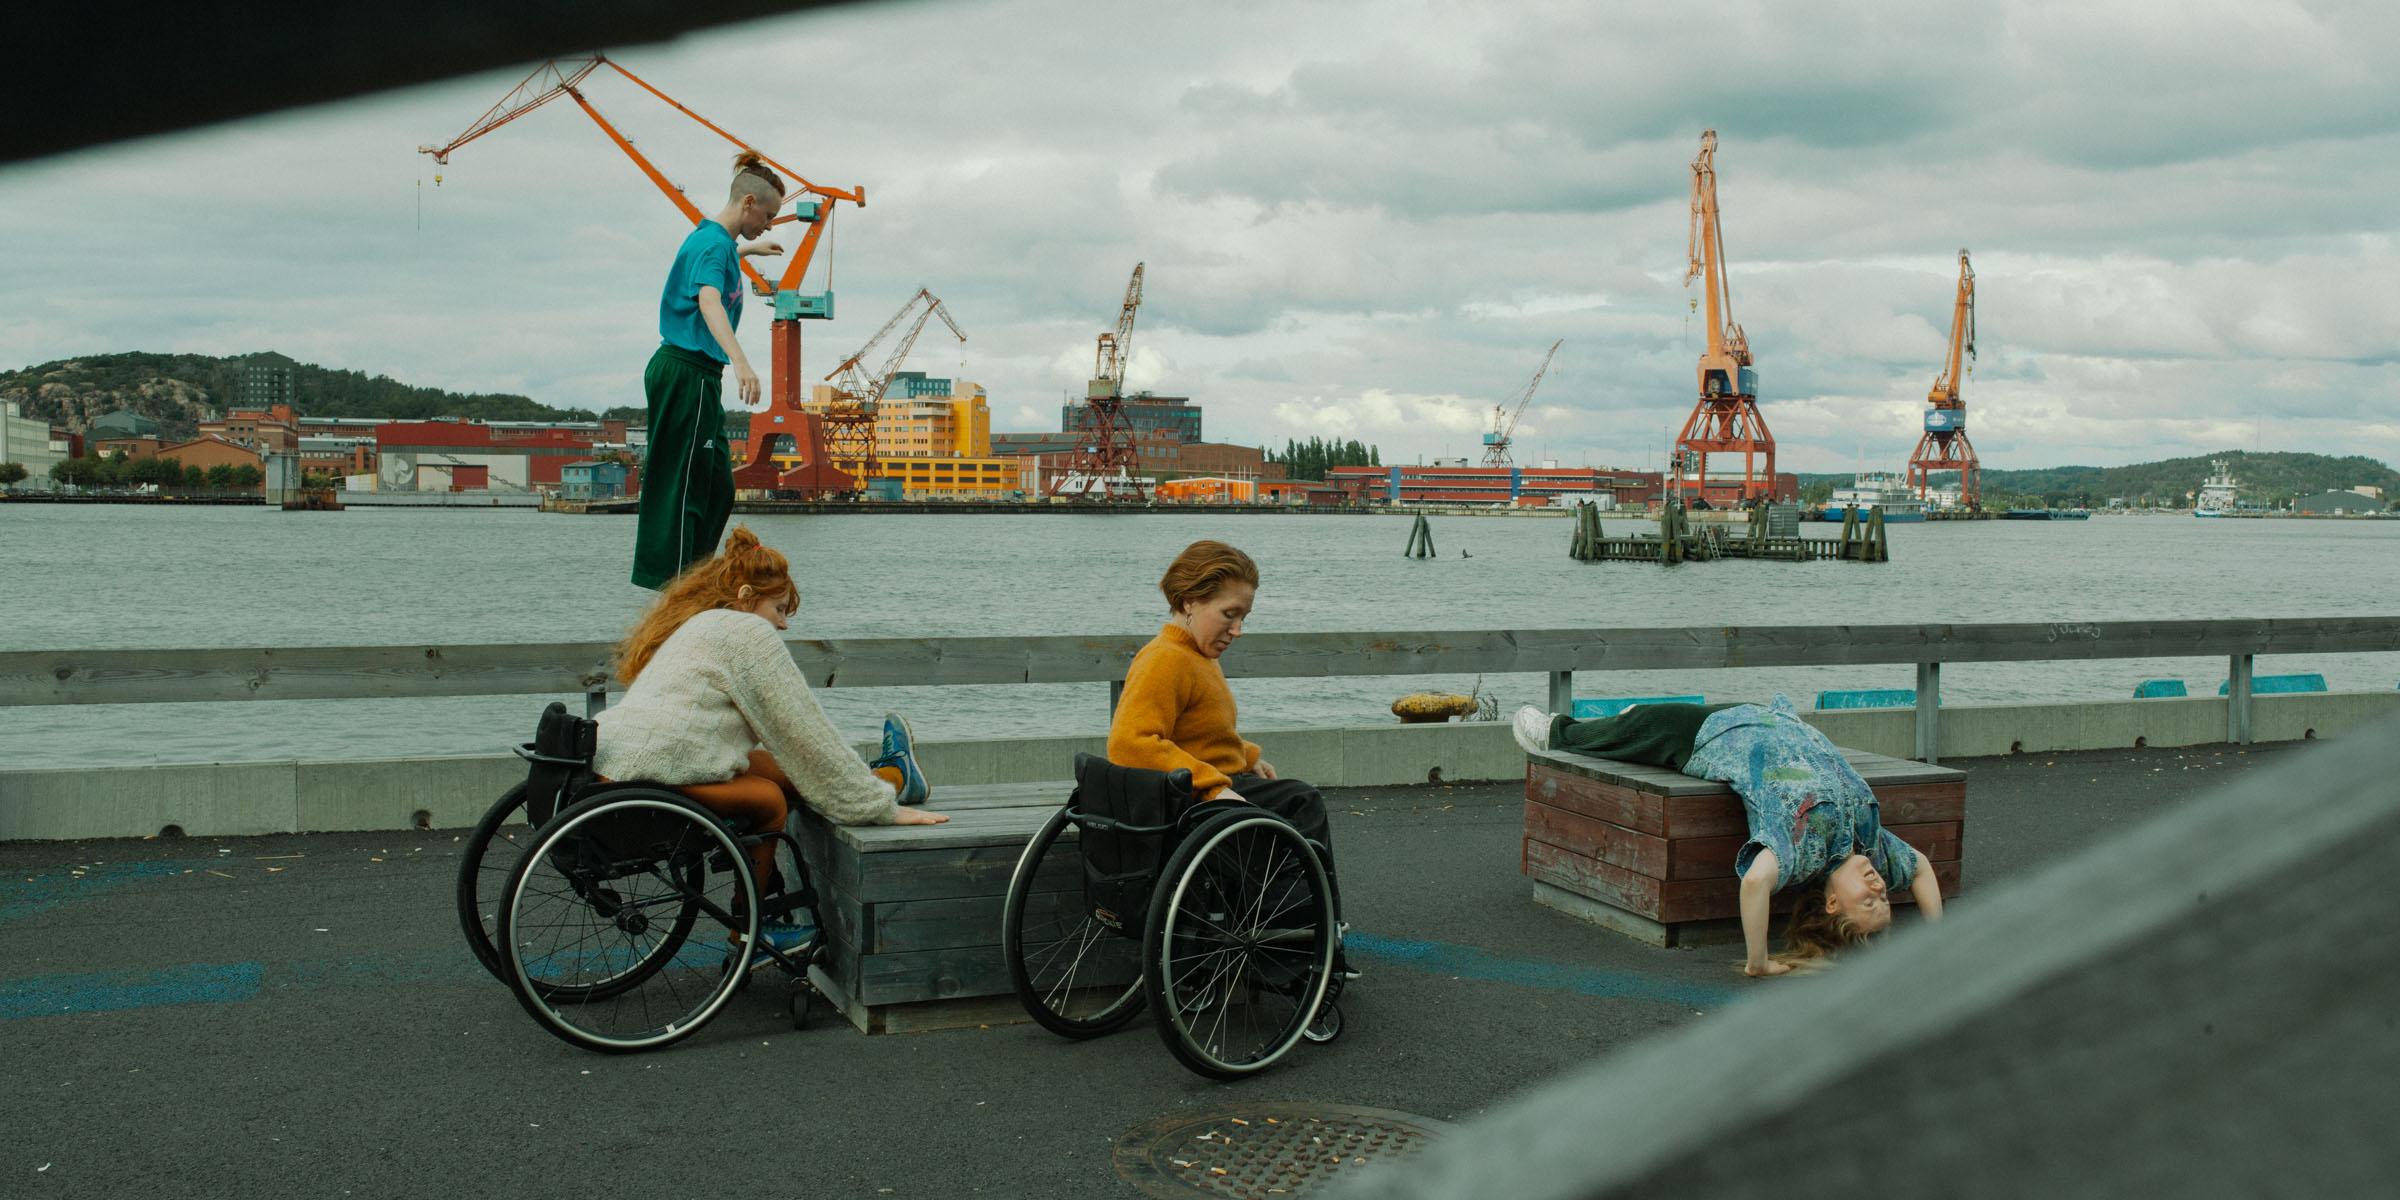 In the picture we see four dancers. They are outdoors. On a wharf by a river. There are cranes in the background. Two dancers sit in wheelchairs, one of whom has one leg up on a wooden box. A third dancer lies on another wooden box and a fourth dancer balances on a concrete edge. Photo Malin Johansson